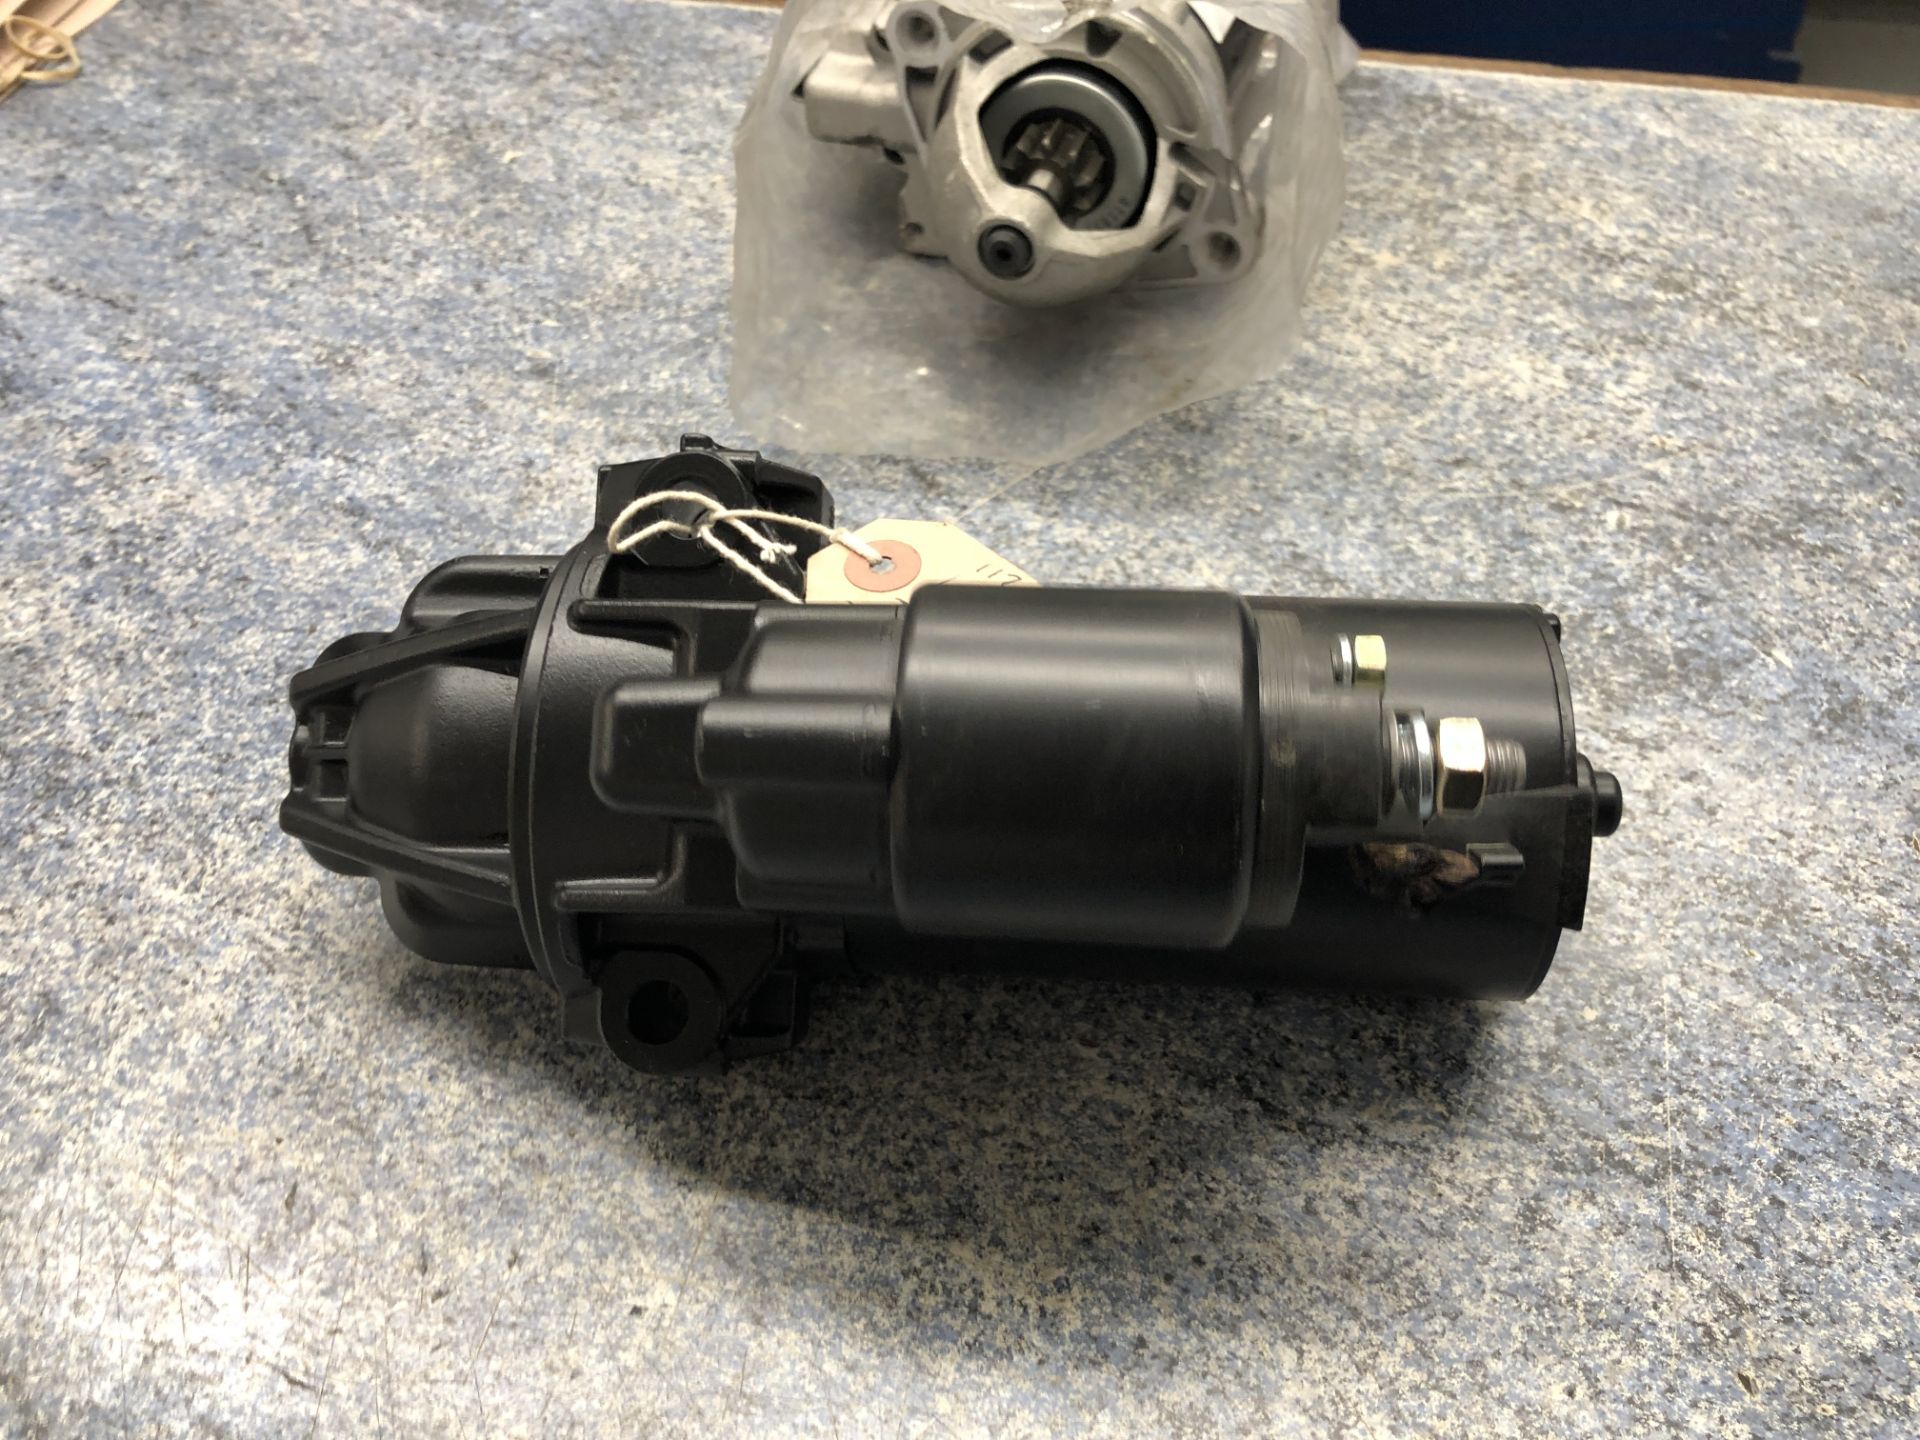 Make Unknown Starter Motor LRS 2759 - Collection By Appointment on Wednesday 12th June 2019) - Image 4 of 6